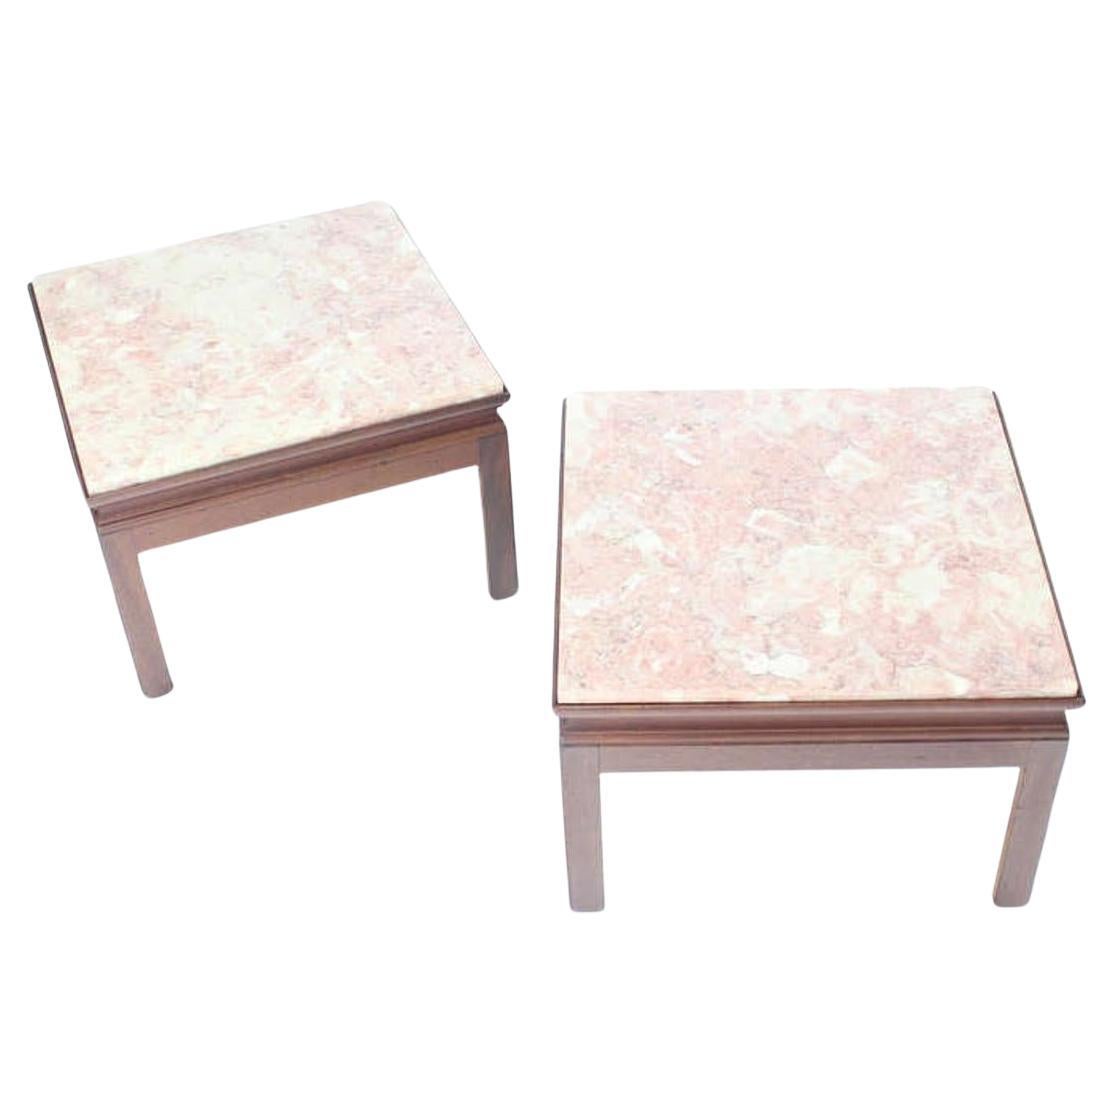 The Moderns Modern Pair Low Profile Square Marble Top Side End Tables Stand MINT en vente